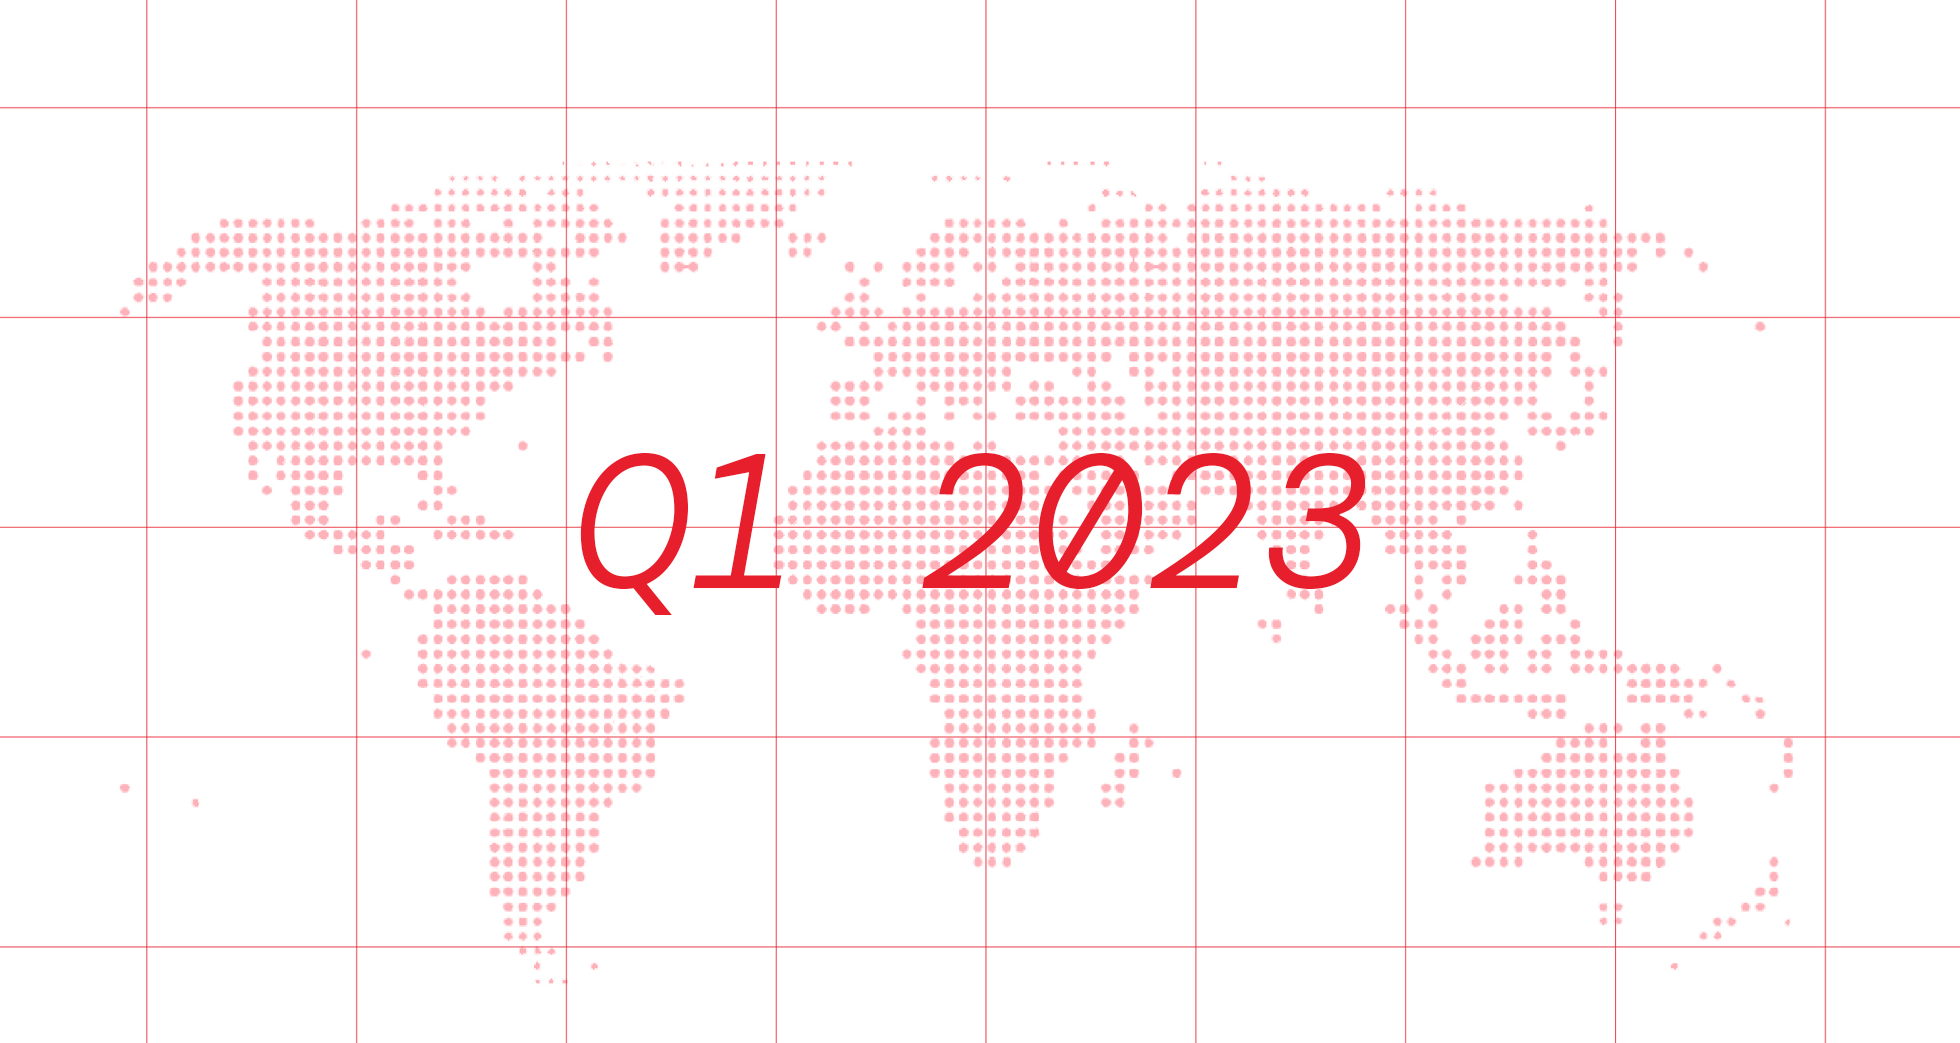 Believe Q12023 Results